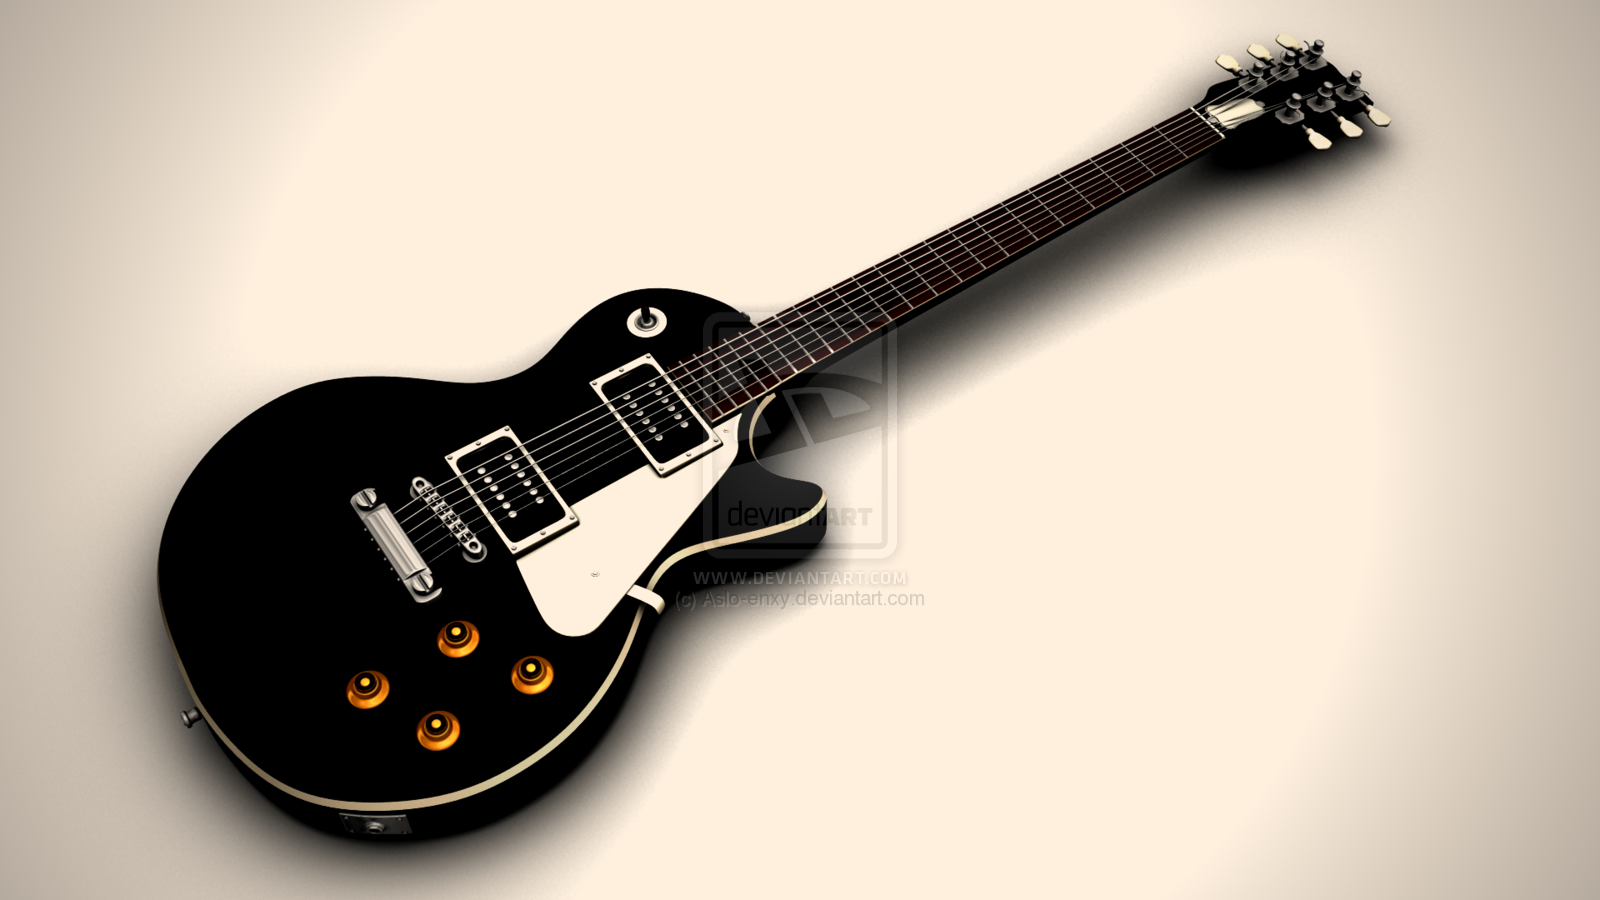 Gibson Les Paul Guitar By Aslo Enxy